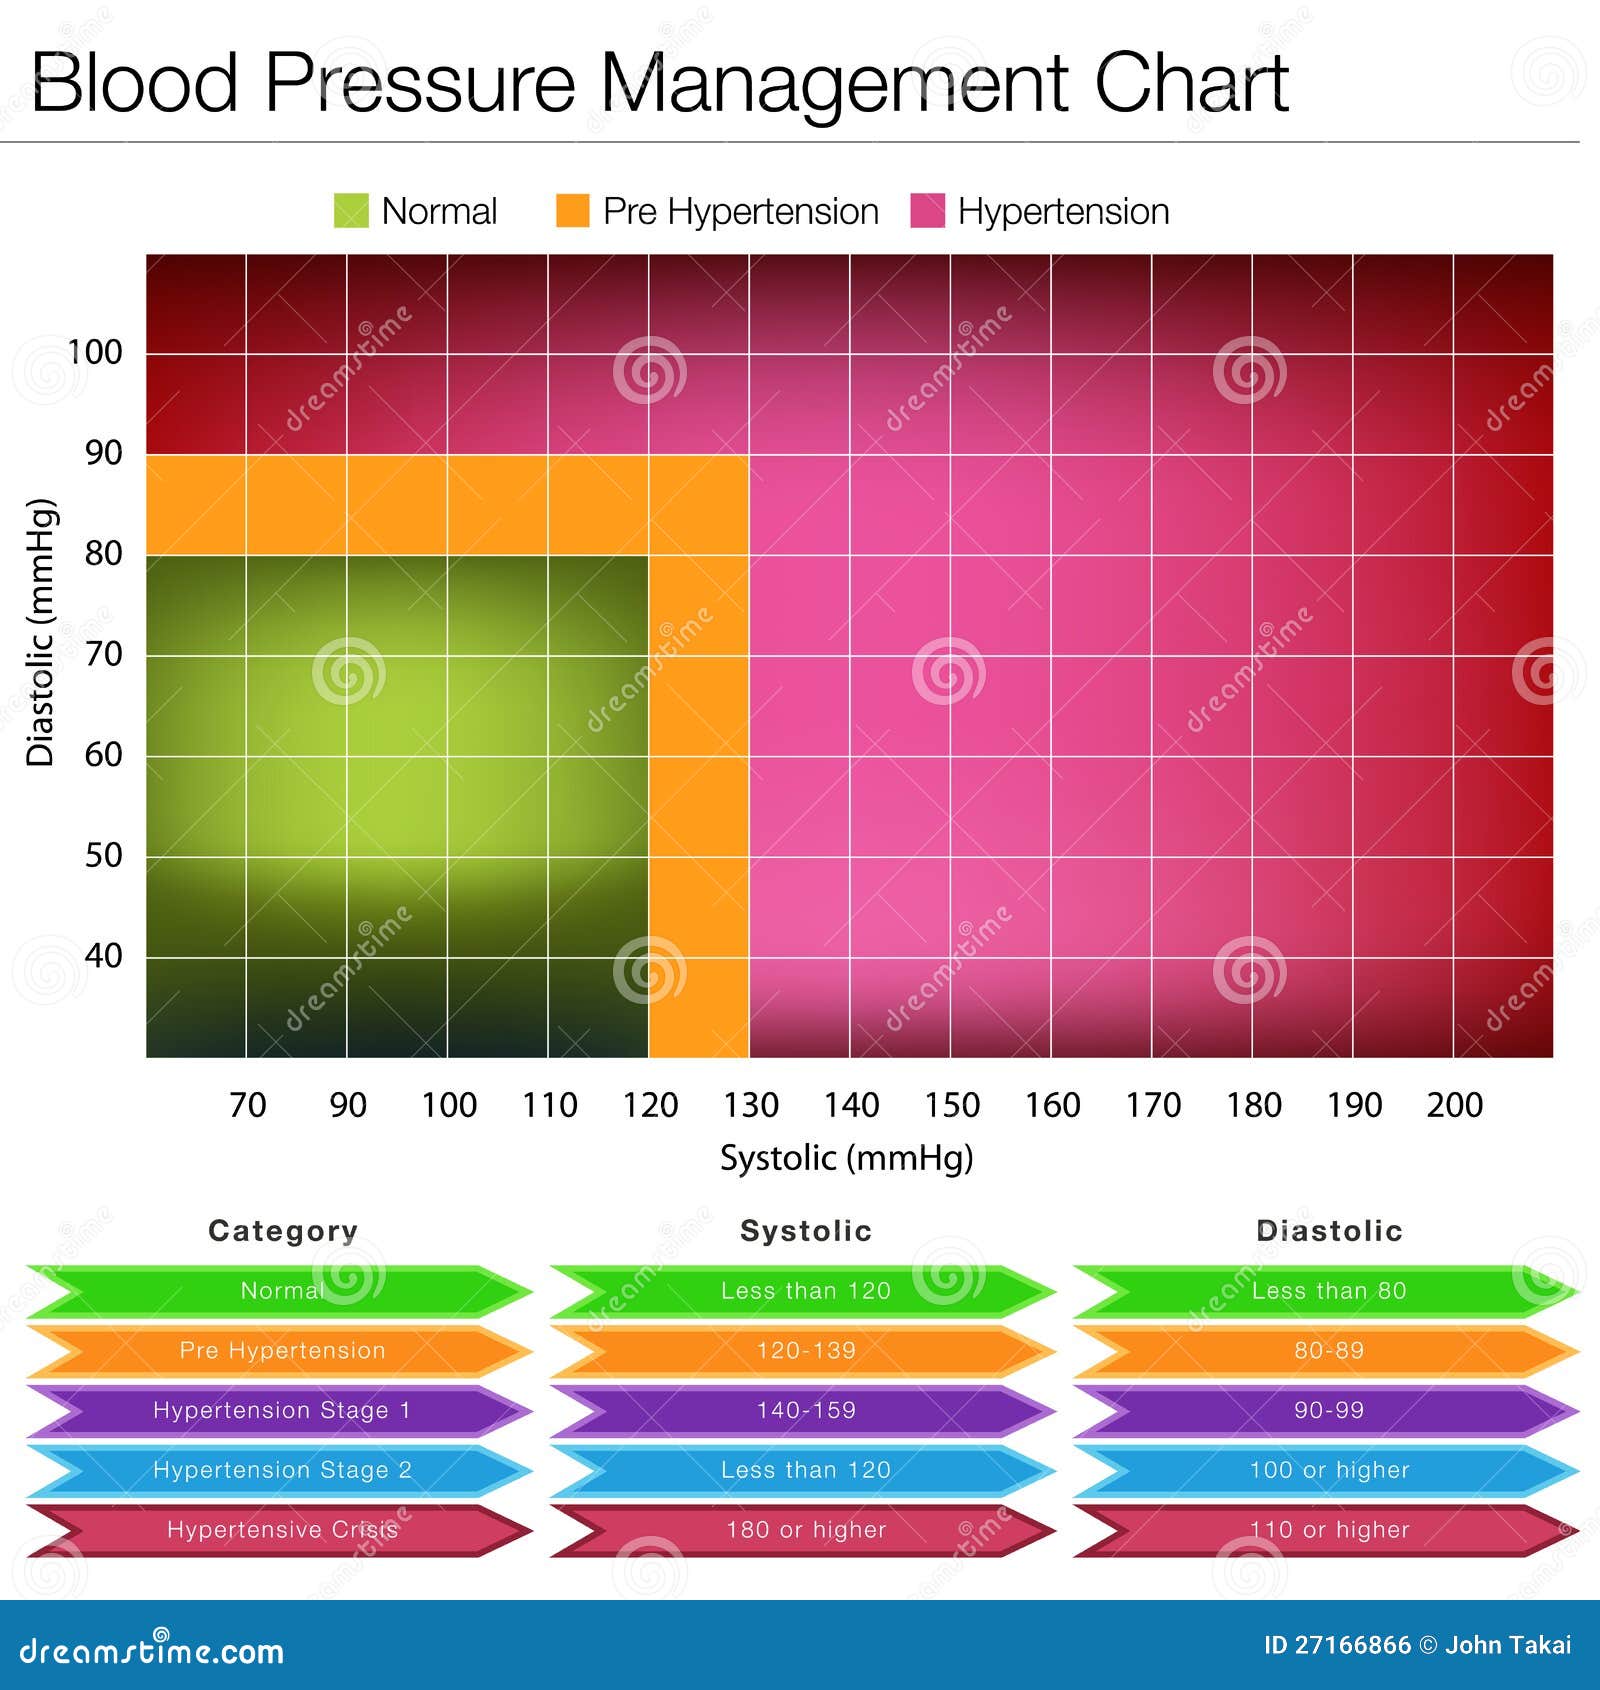 Blood Pressure Management Chart Royalty Free Stock Image